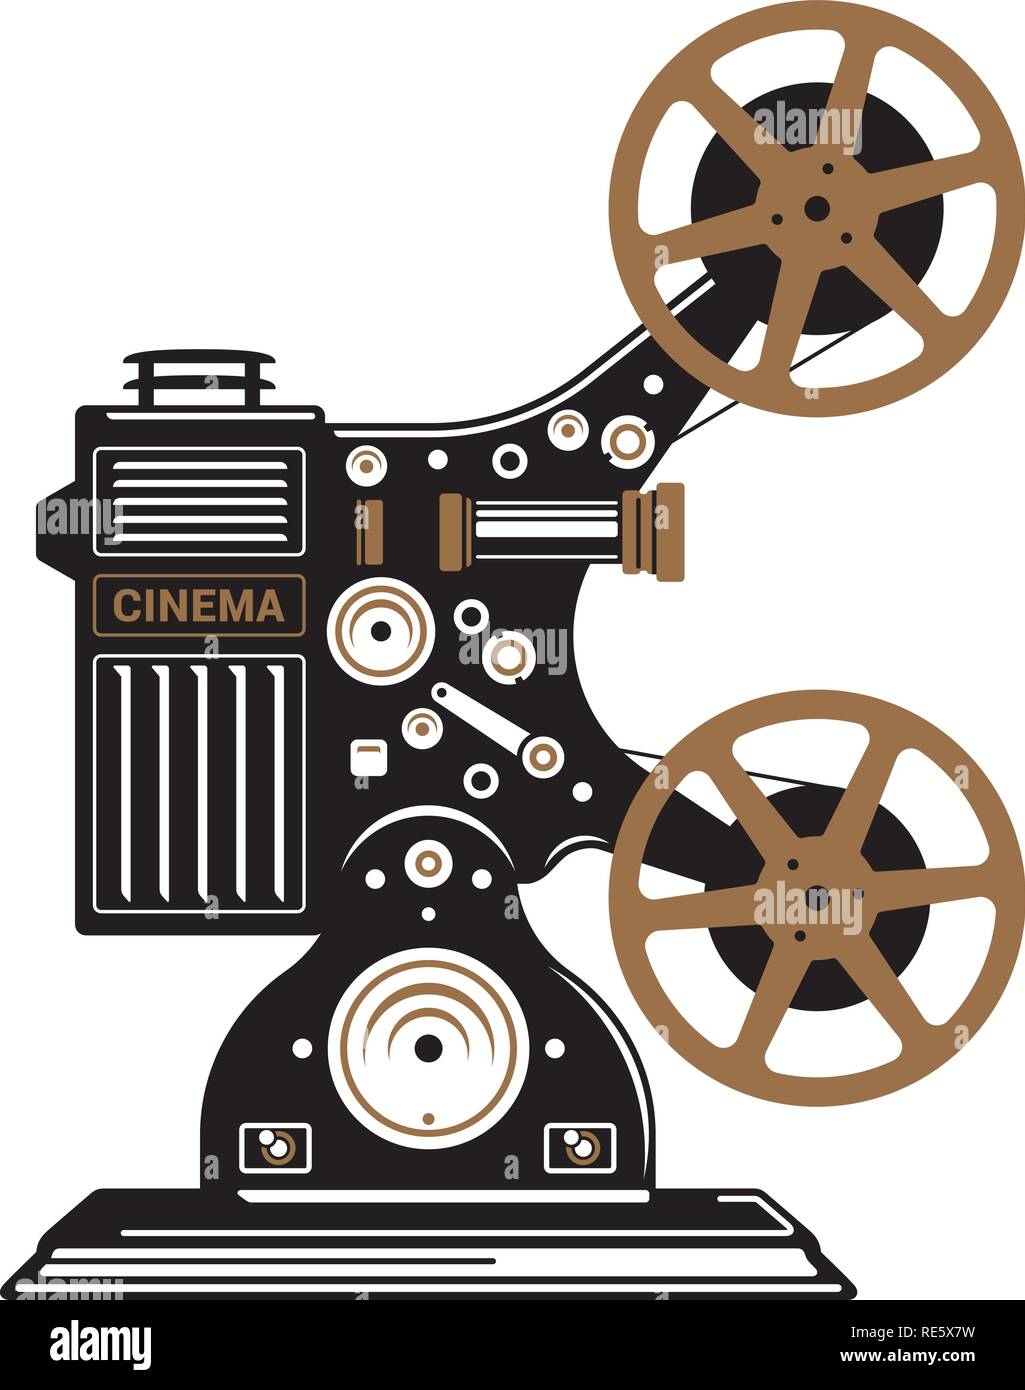 Vintage projector Stock Vector Images - Alamy